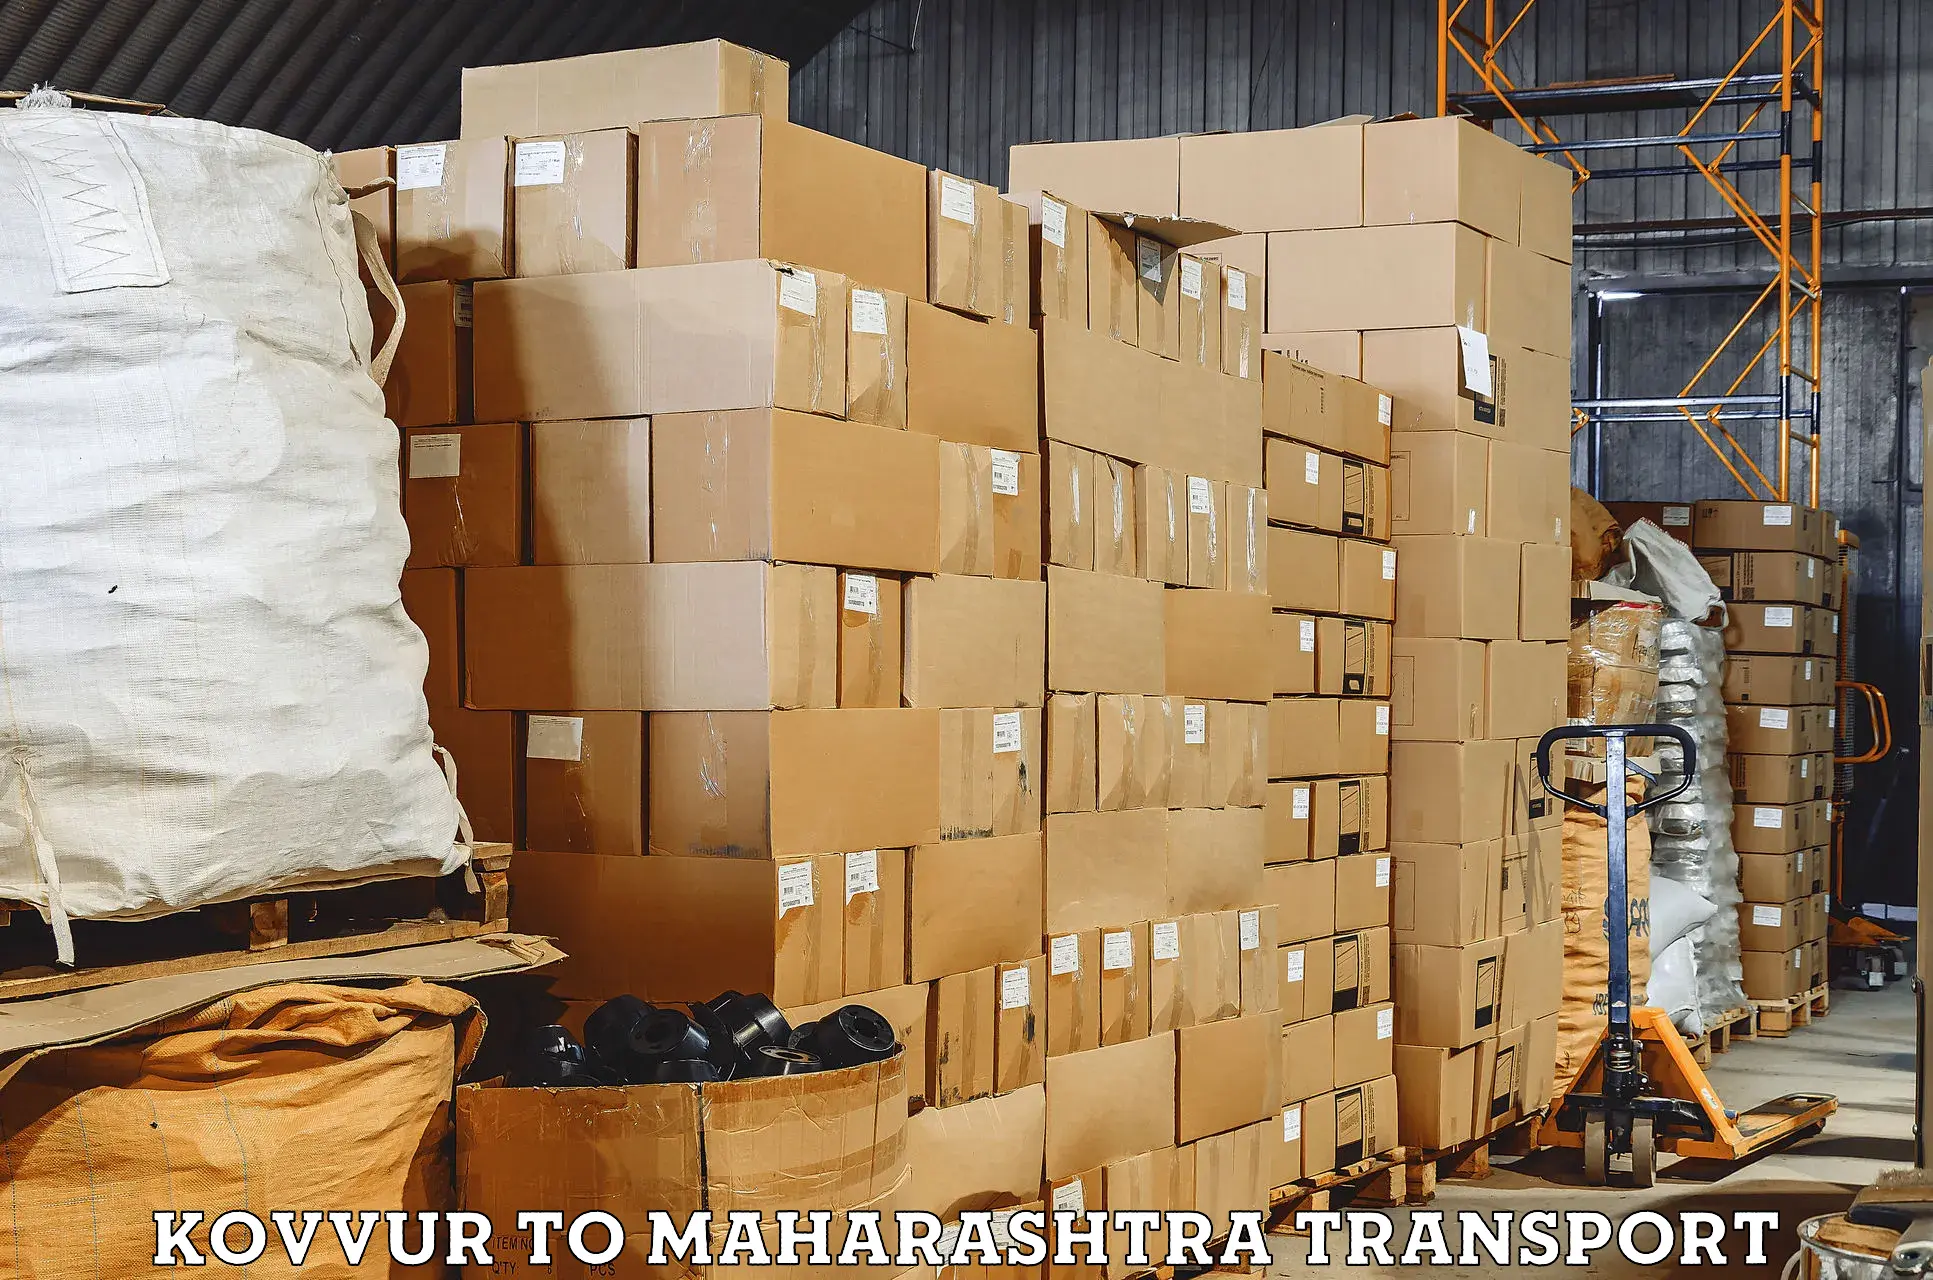 Part load transport service in India in Kovvur to Bhoom